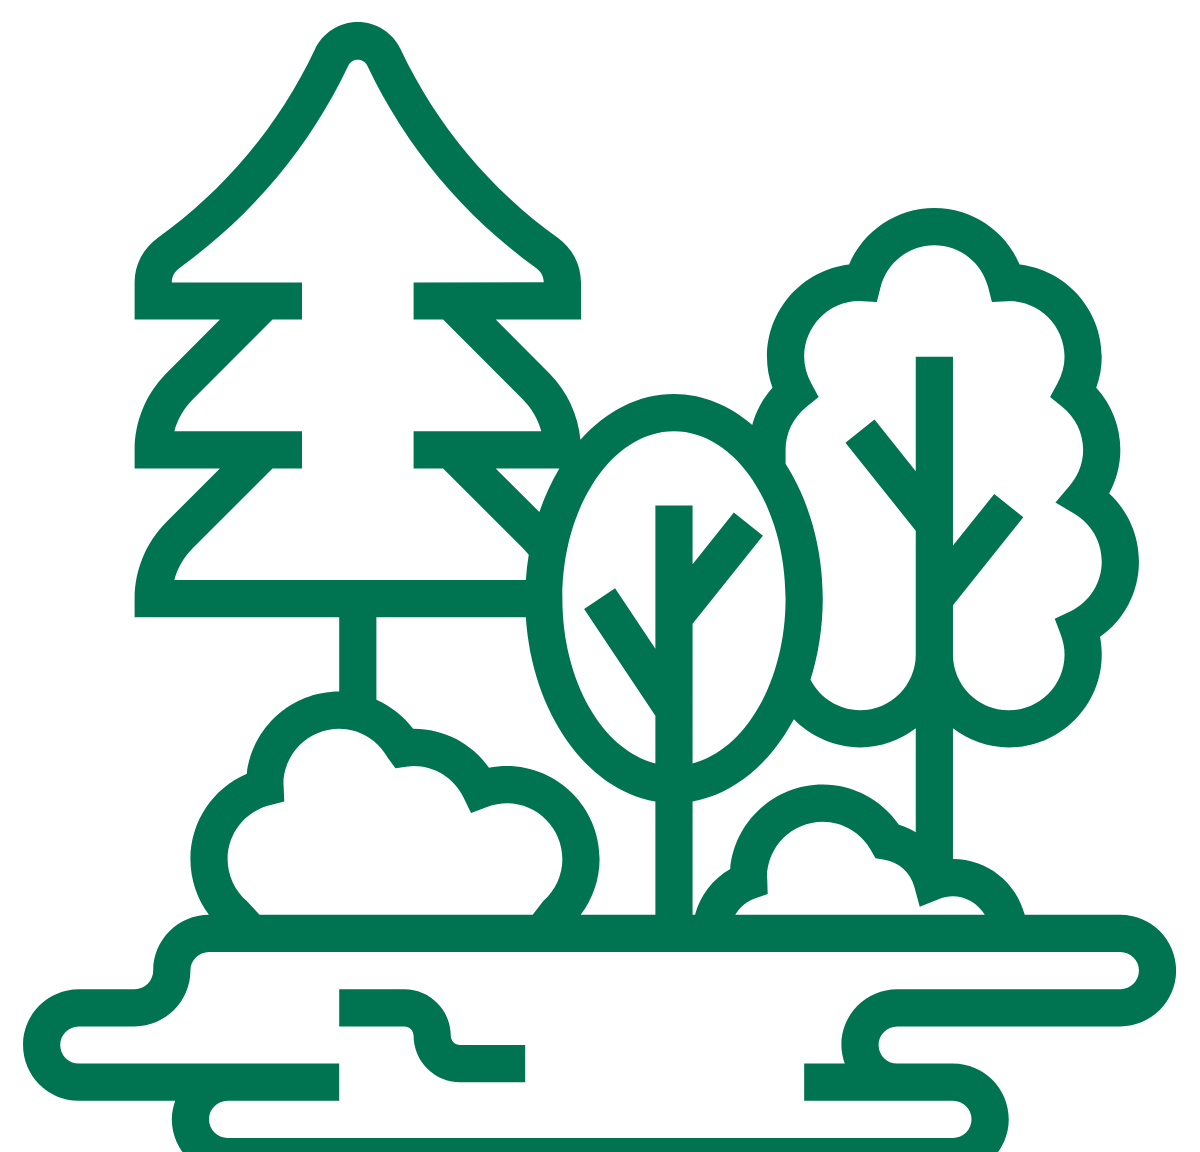 Graphic, green icon of trees and shrubbery.